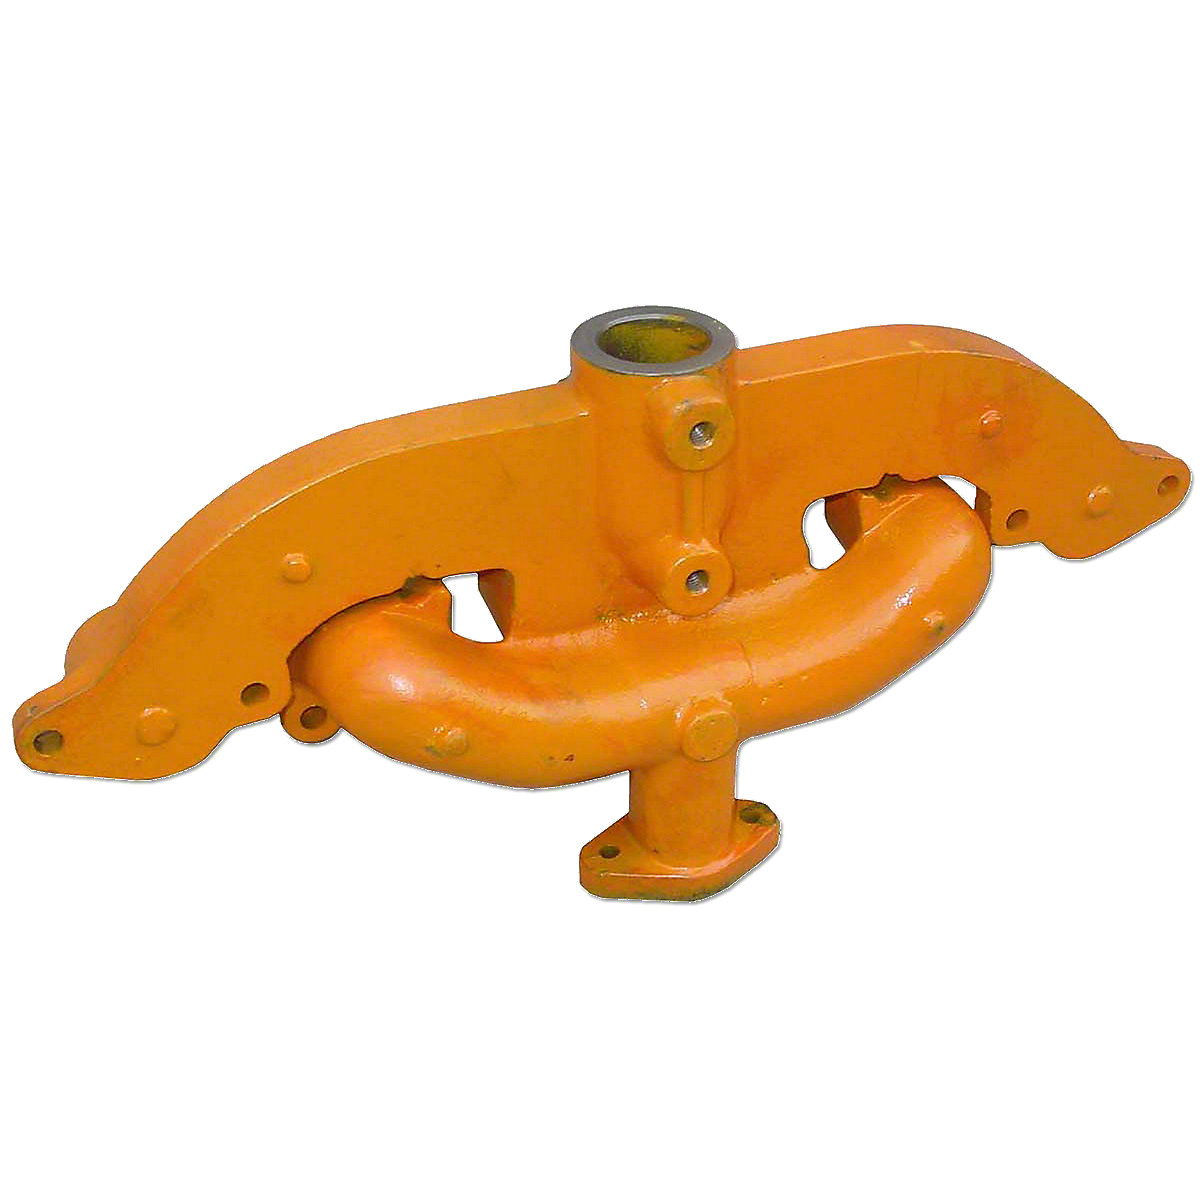 Intake And Exhaust Manifold For Allis Chalmers D10, D12, I40, I400